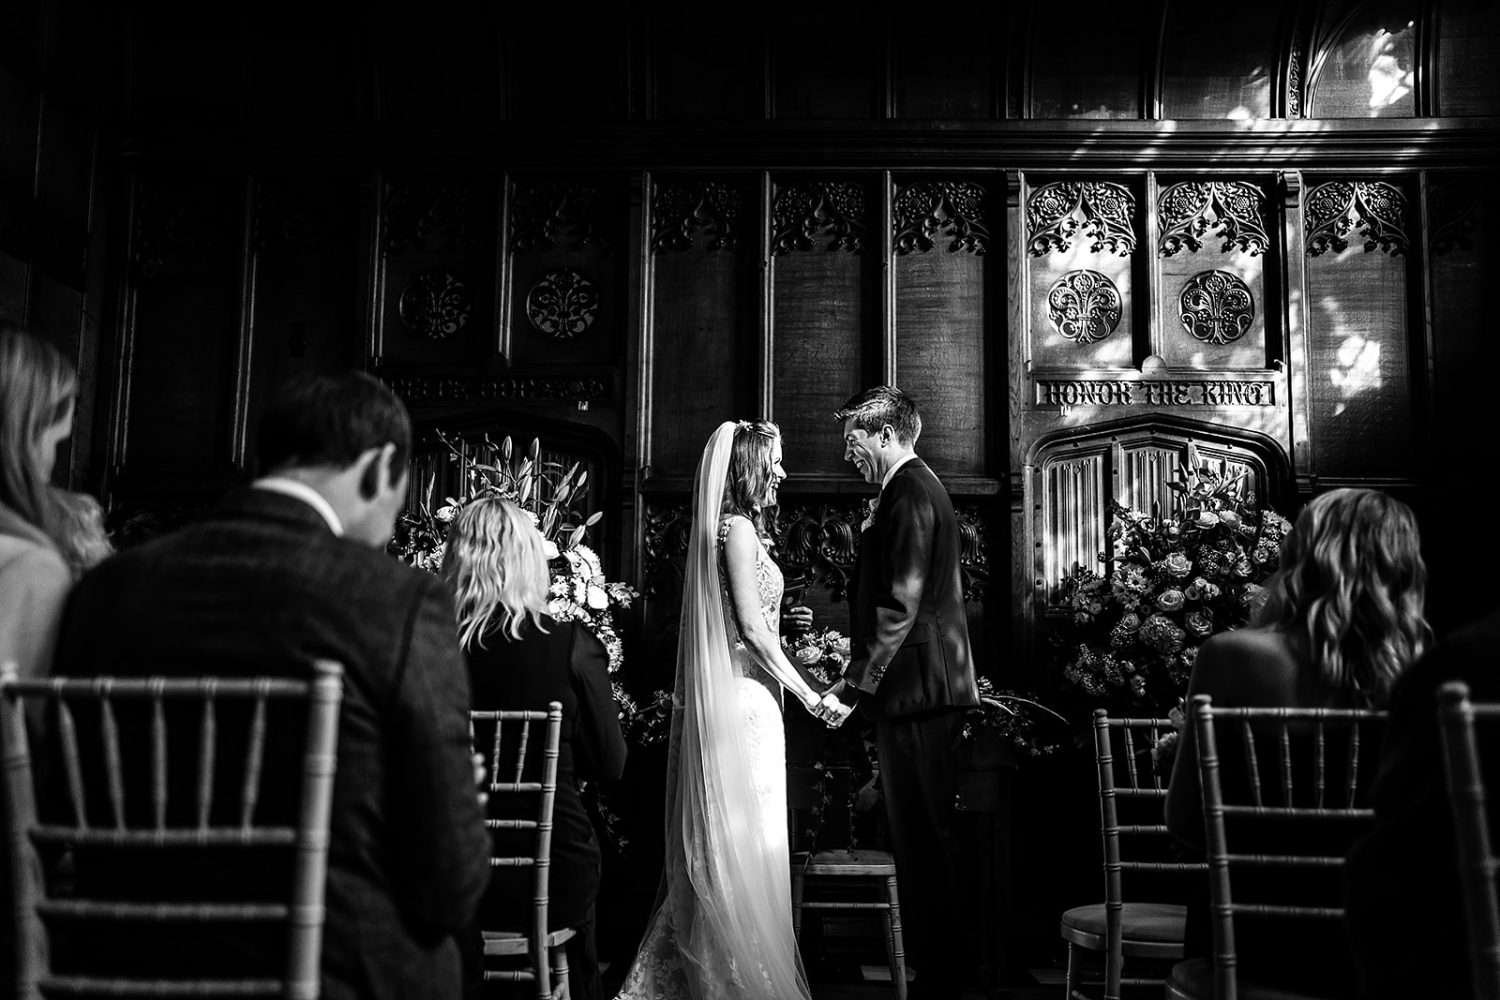 A black and white photo from a wedding in Suffolk at Hengrave hall. We see a Bride and Groom holding hands and smiling at one another just before the kiss. The Groom wears a black traditional tuxedo and the Bride is in a white lace full length dress with cathedral veil. The wood panelling of the great room is in the background and a floral arrangement is to the left of screen. 